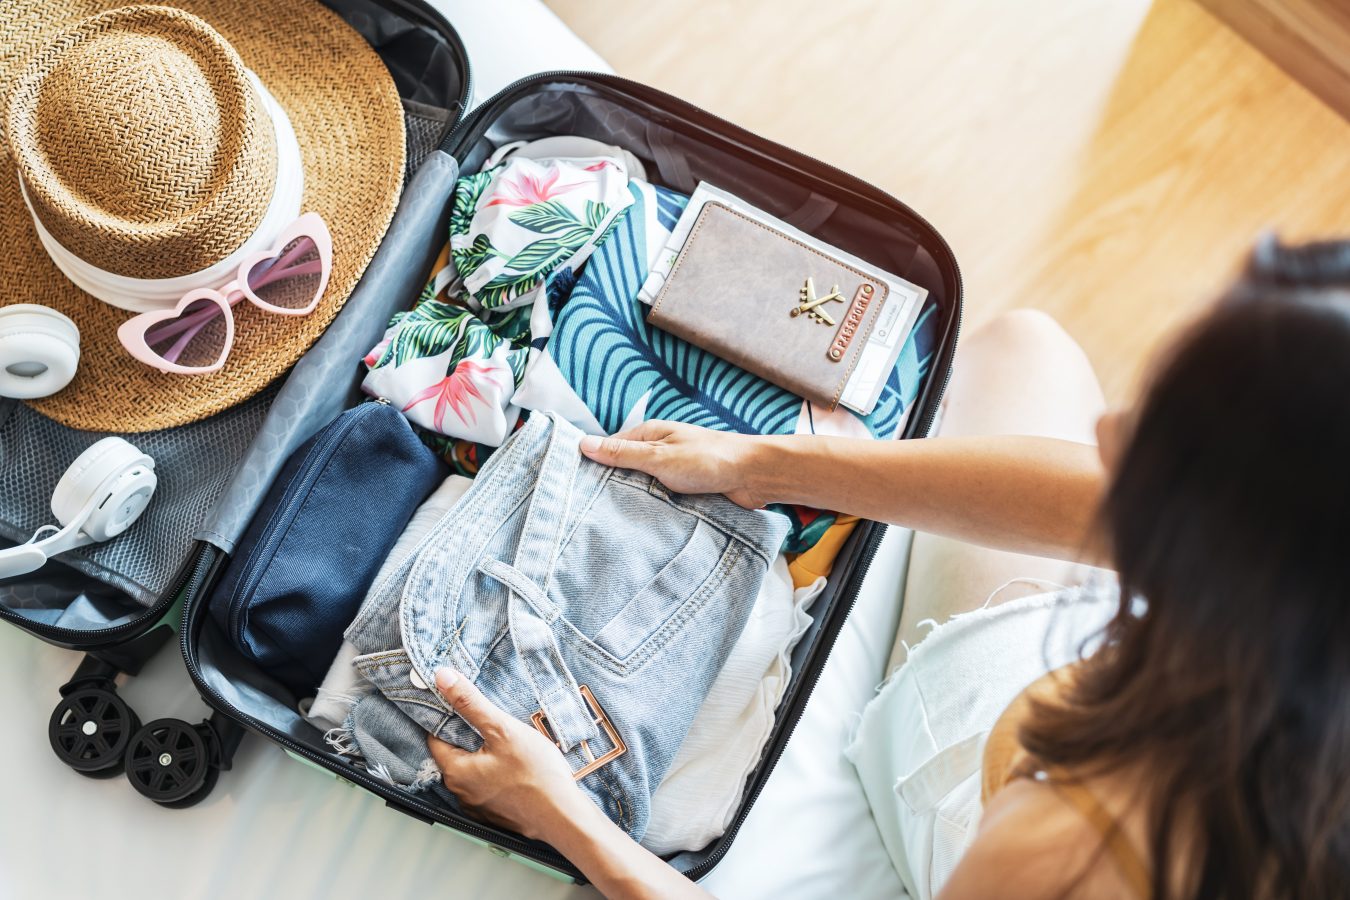 Woman packing her suitcase with warm weather clothes and accessories for spring break.